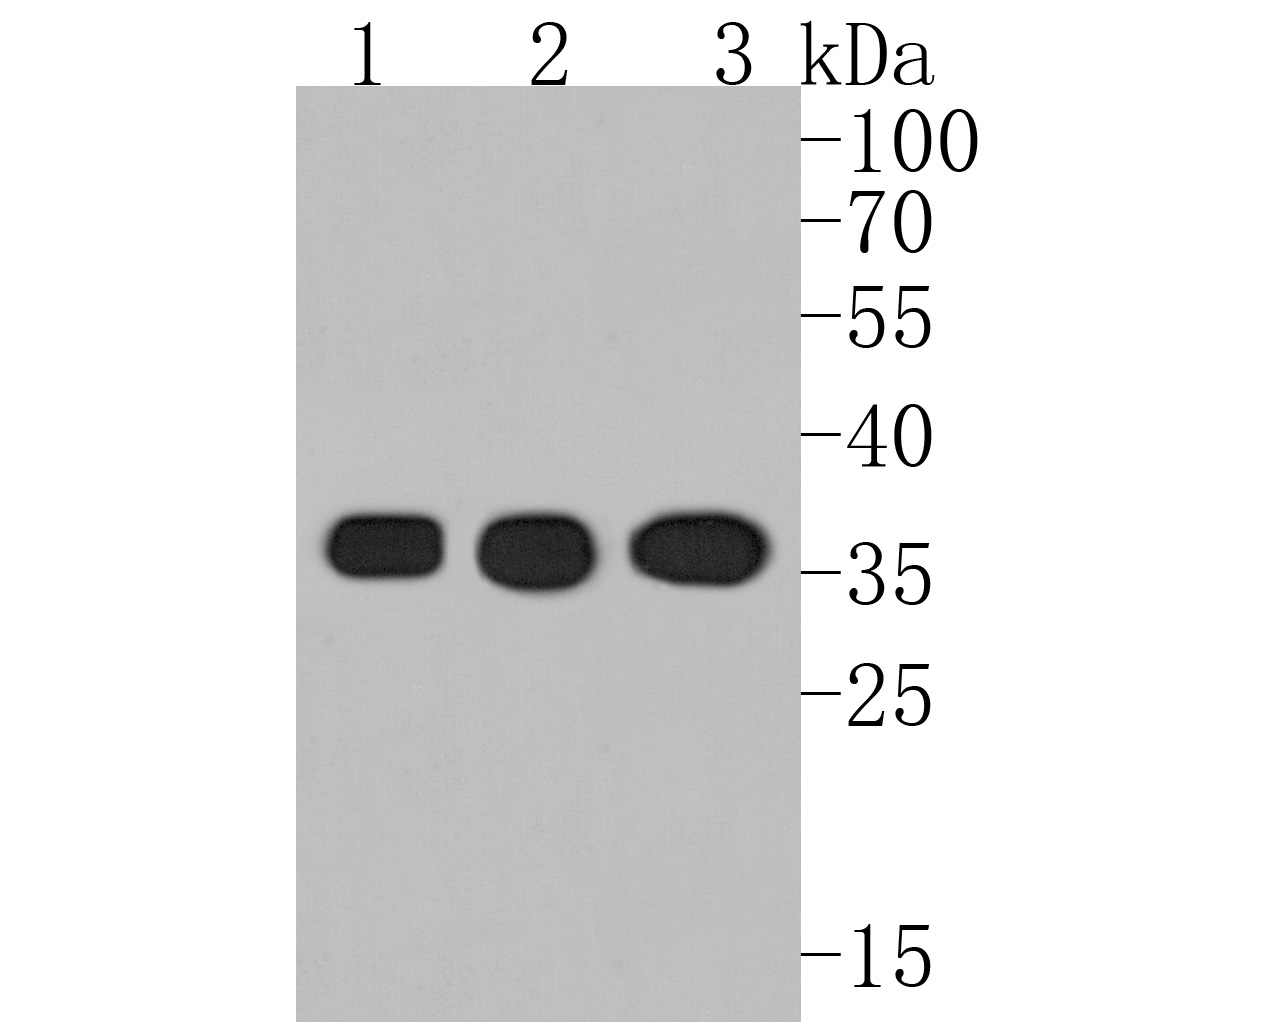 Western blot analysis of Phospho-PP2A(Y307) on different lysates. Proteins were transferred to a PVDF membrane and blocked with 5% BSA in PBS for 1 hour at room temperature. The primary antibody (ET1609-40, 1/500) was used in 5% BSA at room temperature for 2 hours. Goat Anti-Rabbit IgG - HRP Secondary Antibody (HA1001) at 1:5,000 dilution was used for 1 hour at room temperature.<br />
Positive control: <br />
Lane 1: F9 cell lysate<br />
Lane 2: PC-12 cell lysate<br />
Lane 3: A431 cell lysate